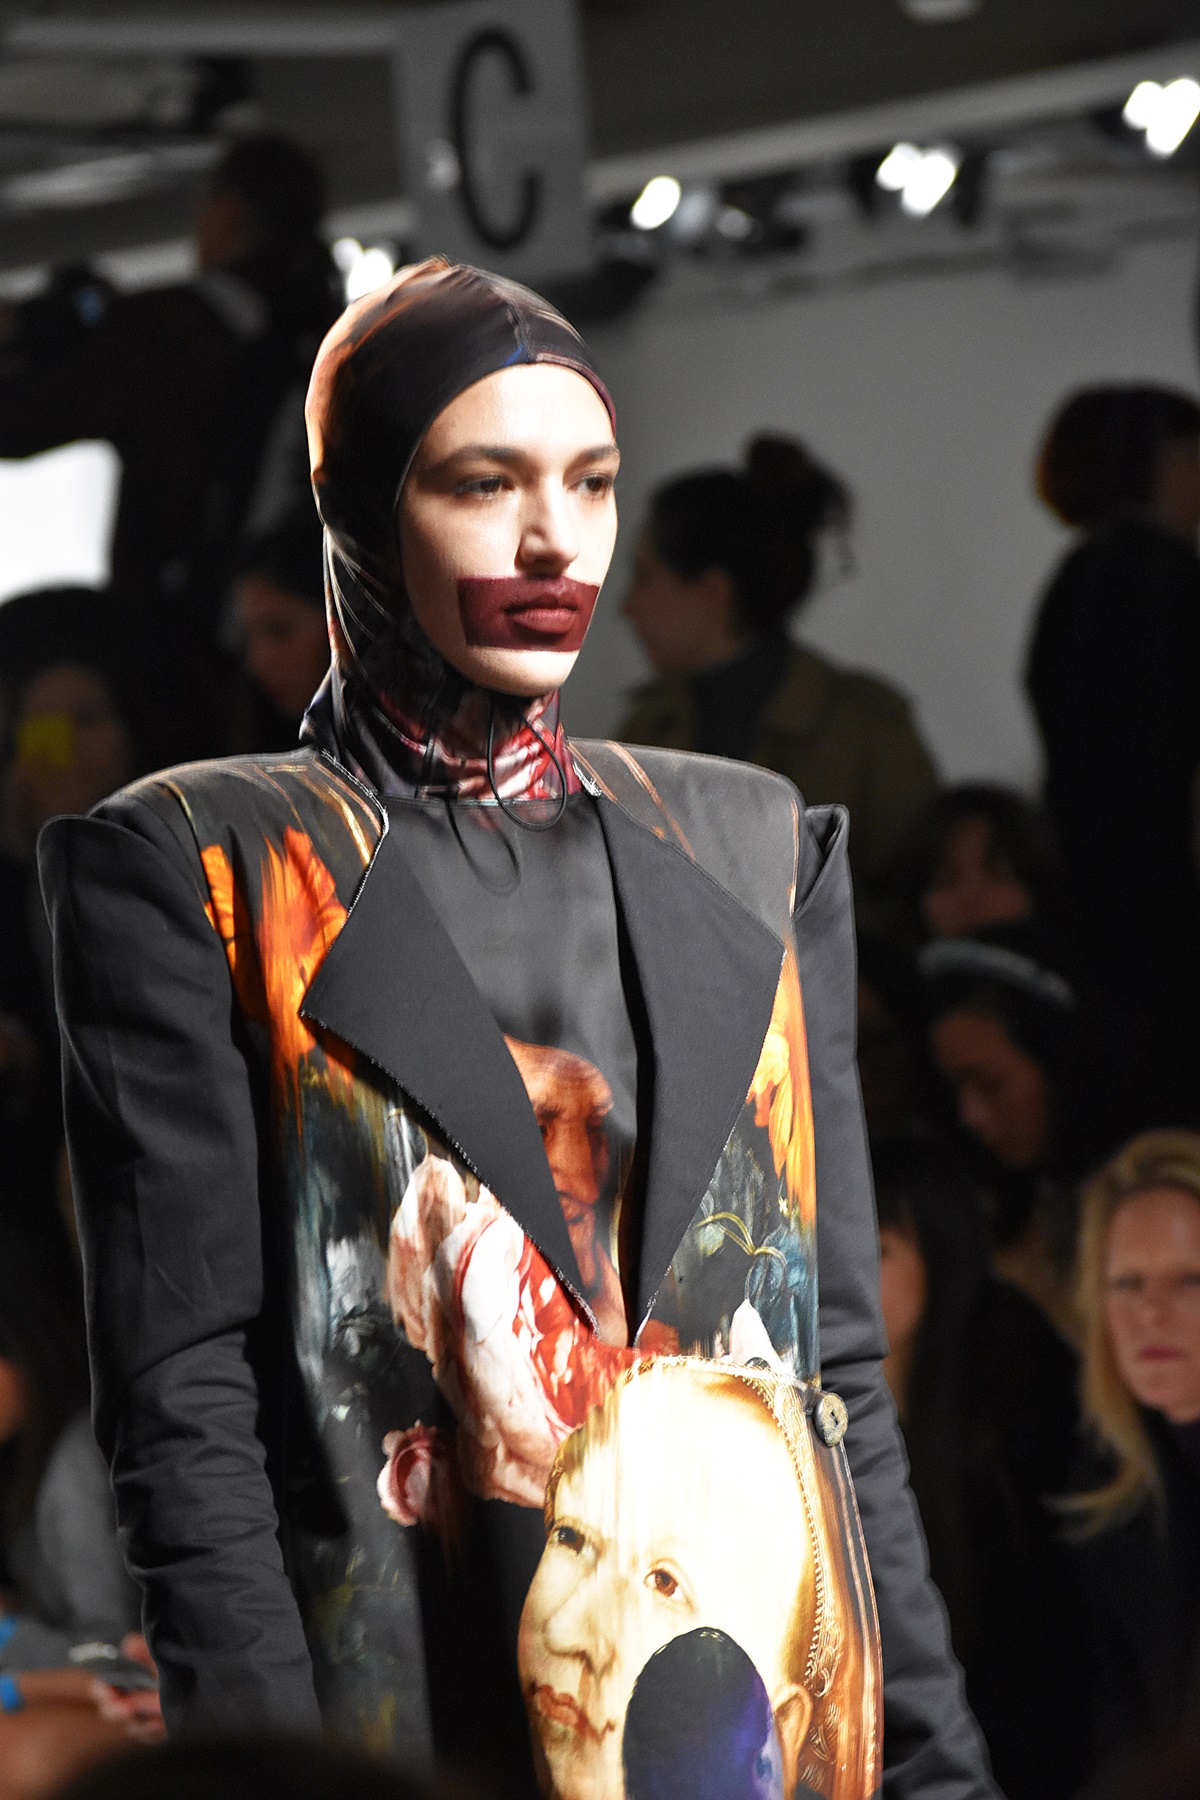 IA London prints AW/19, OnOff fashion show at LFW, Febrauary 2019, highlights by Think Feel Discover